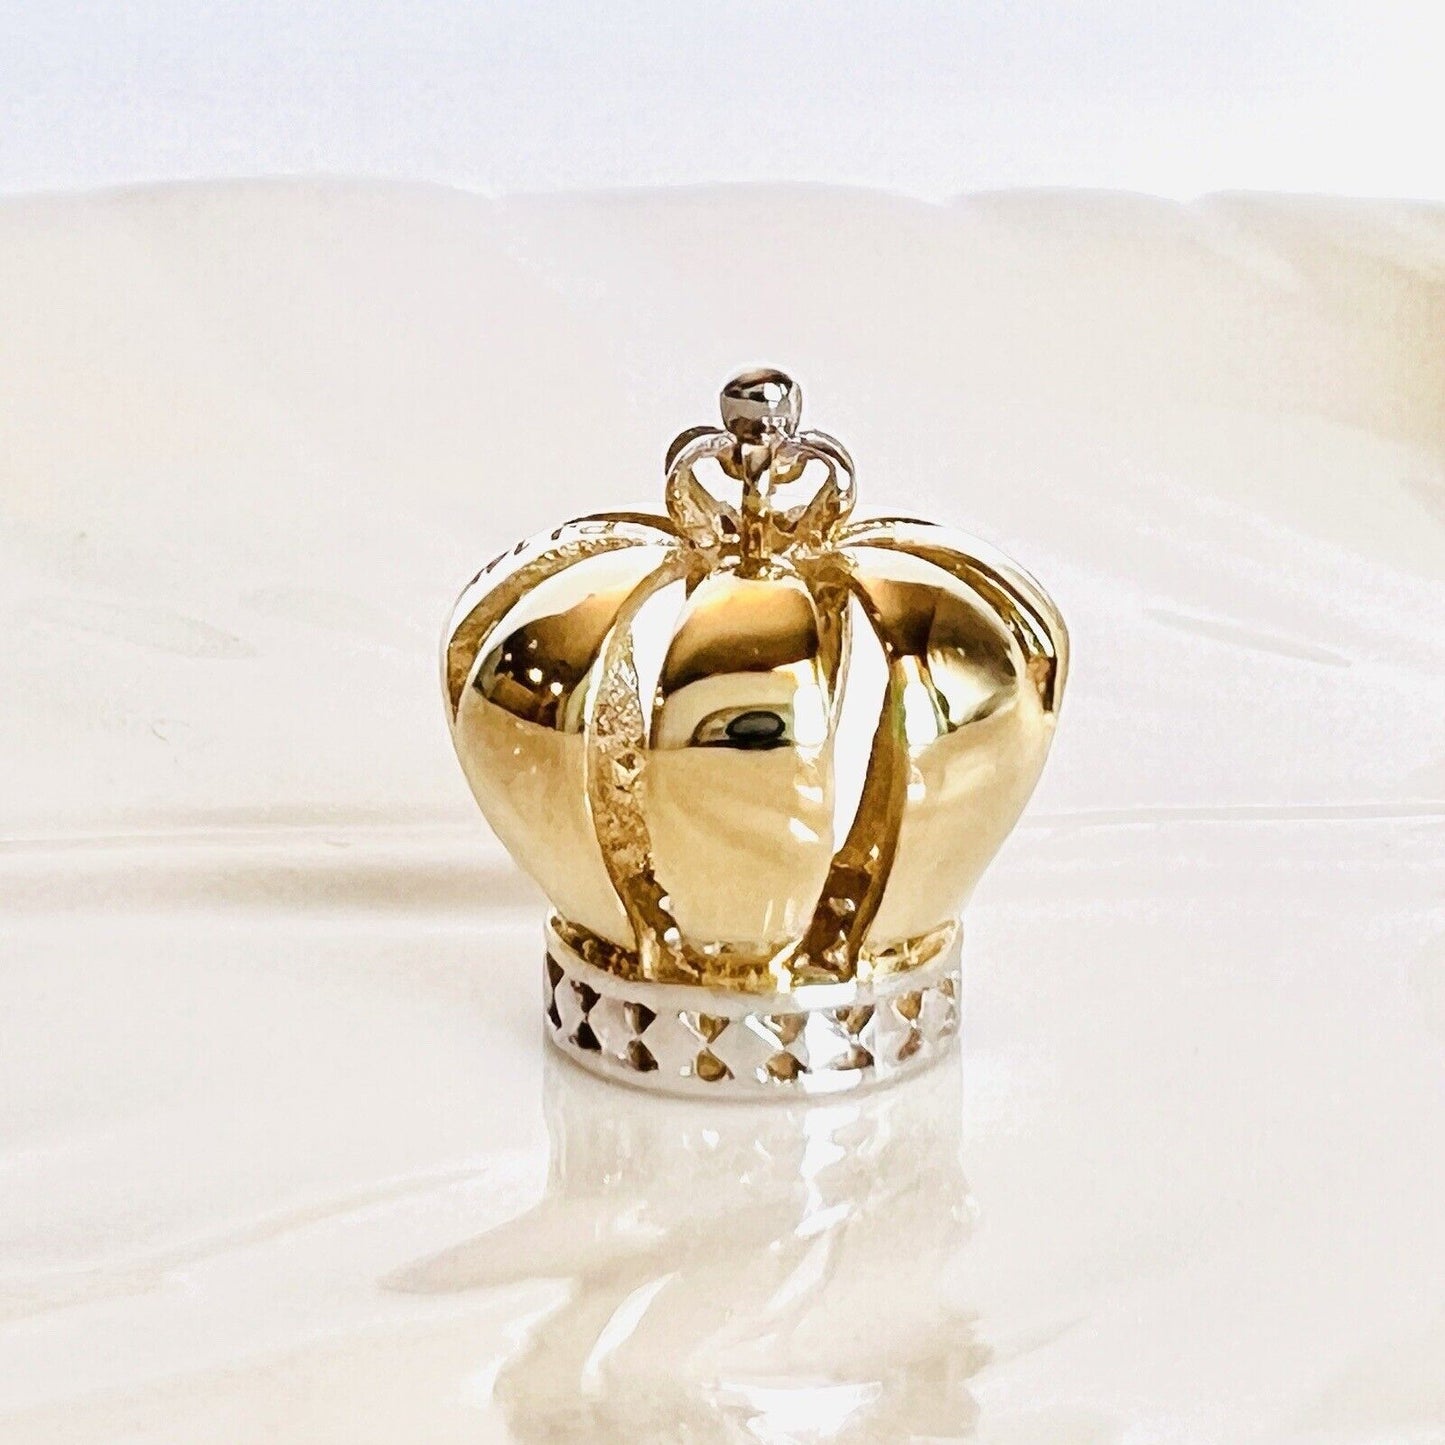 Solid 14k Yellow Gold Royal Crown Charm for European Style Bracelets, New